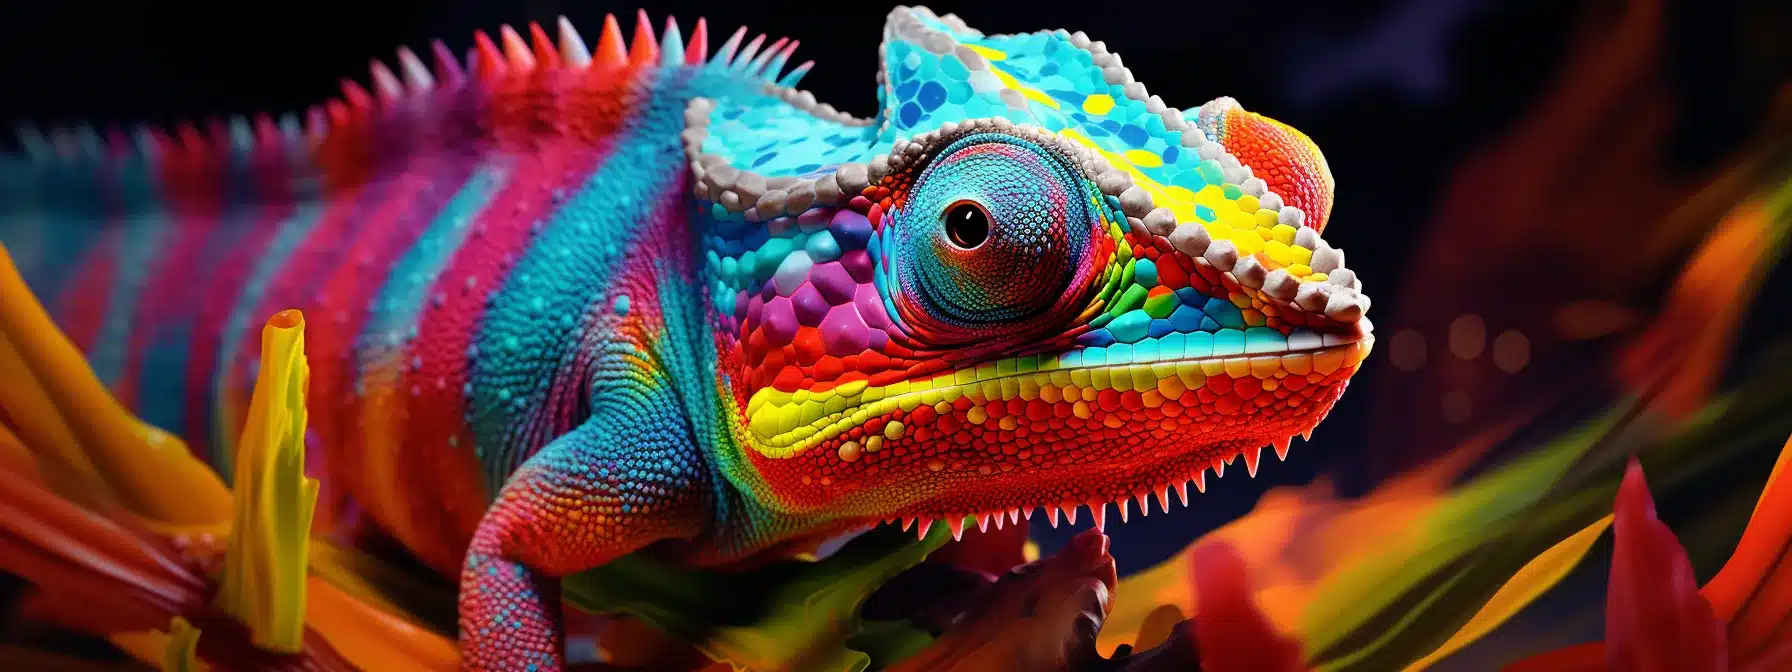 A Vibrant Canvas Painting Depicting A Chameleon Blending Into A Kaleidoscope Of Colors.